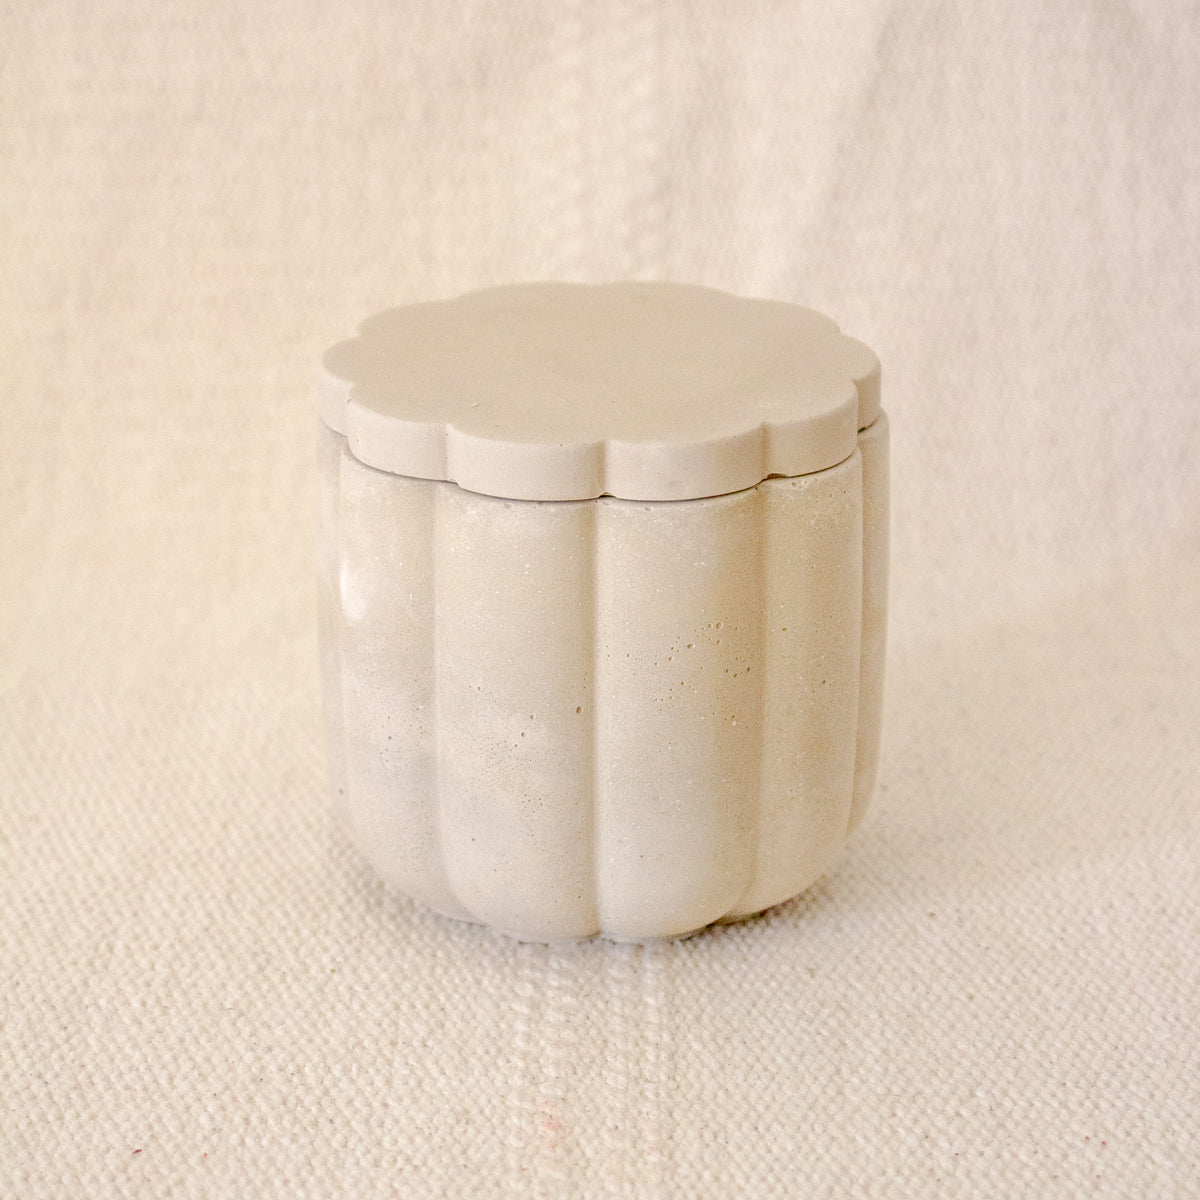 7oz Empty Concrete Candle Jar with Lid Option - Scallop Style